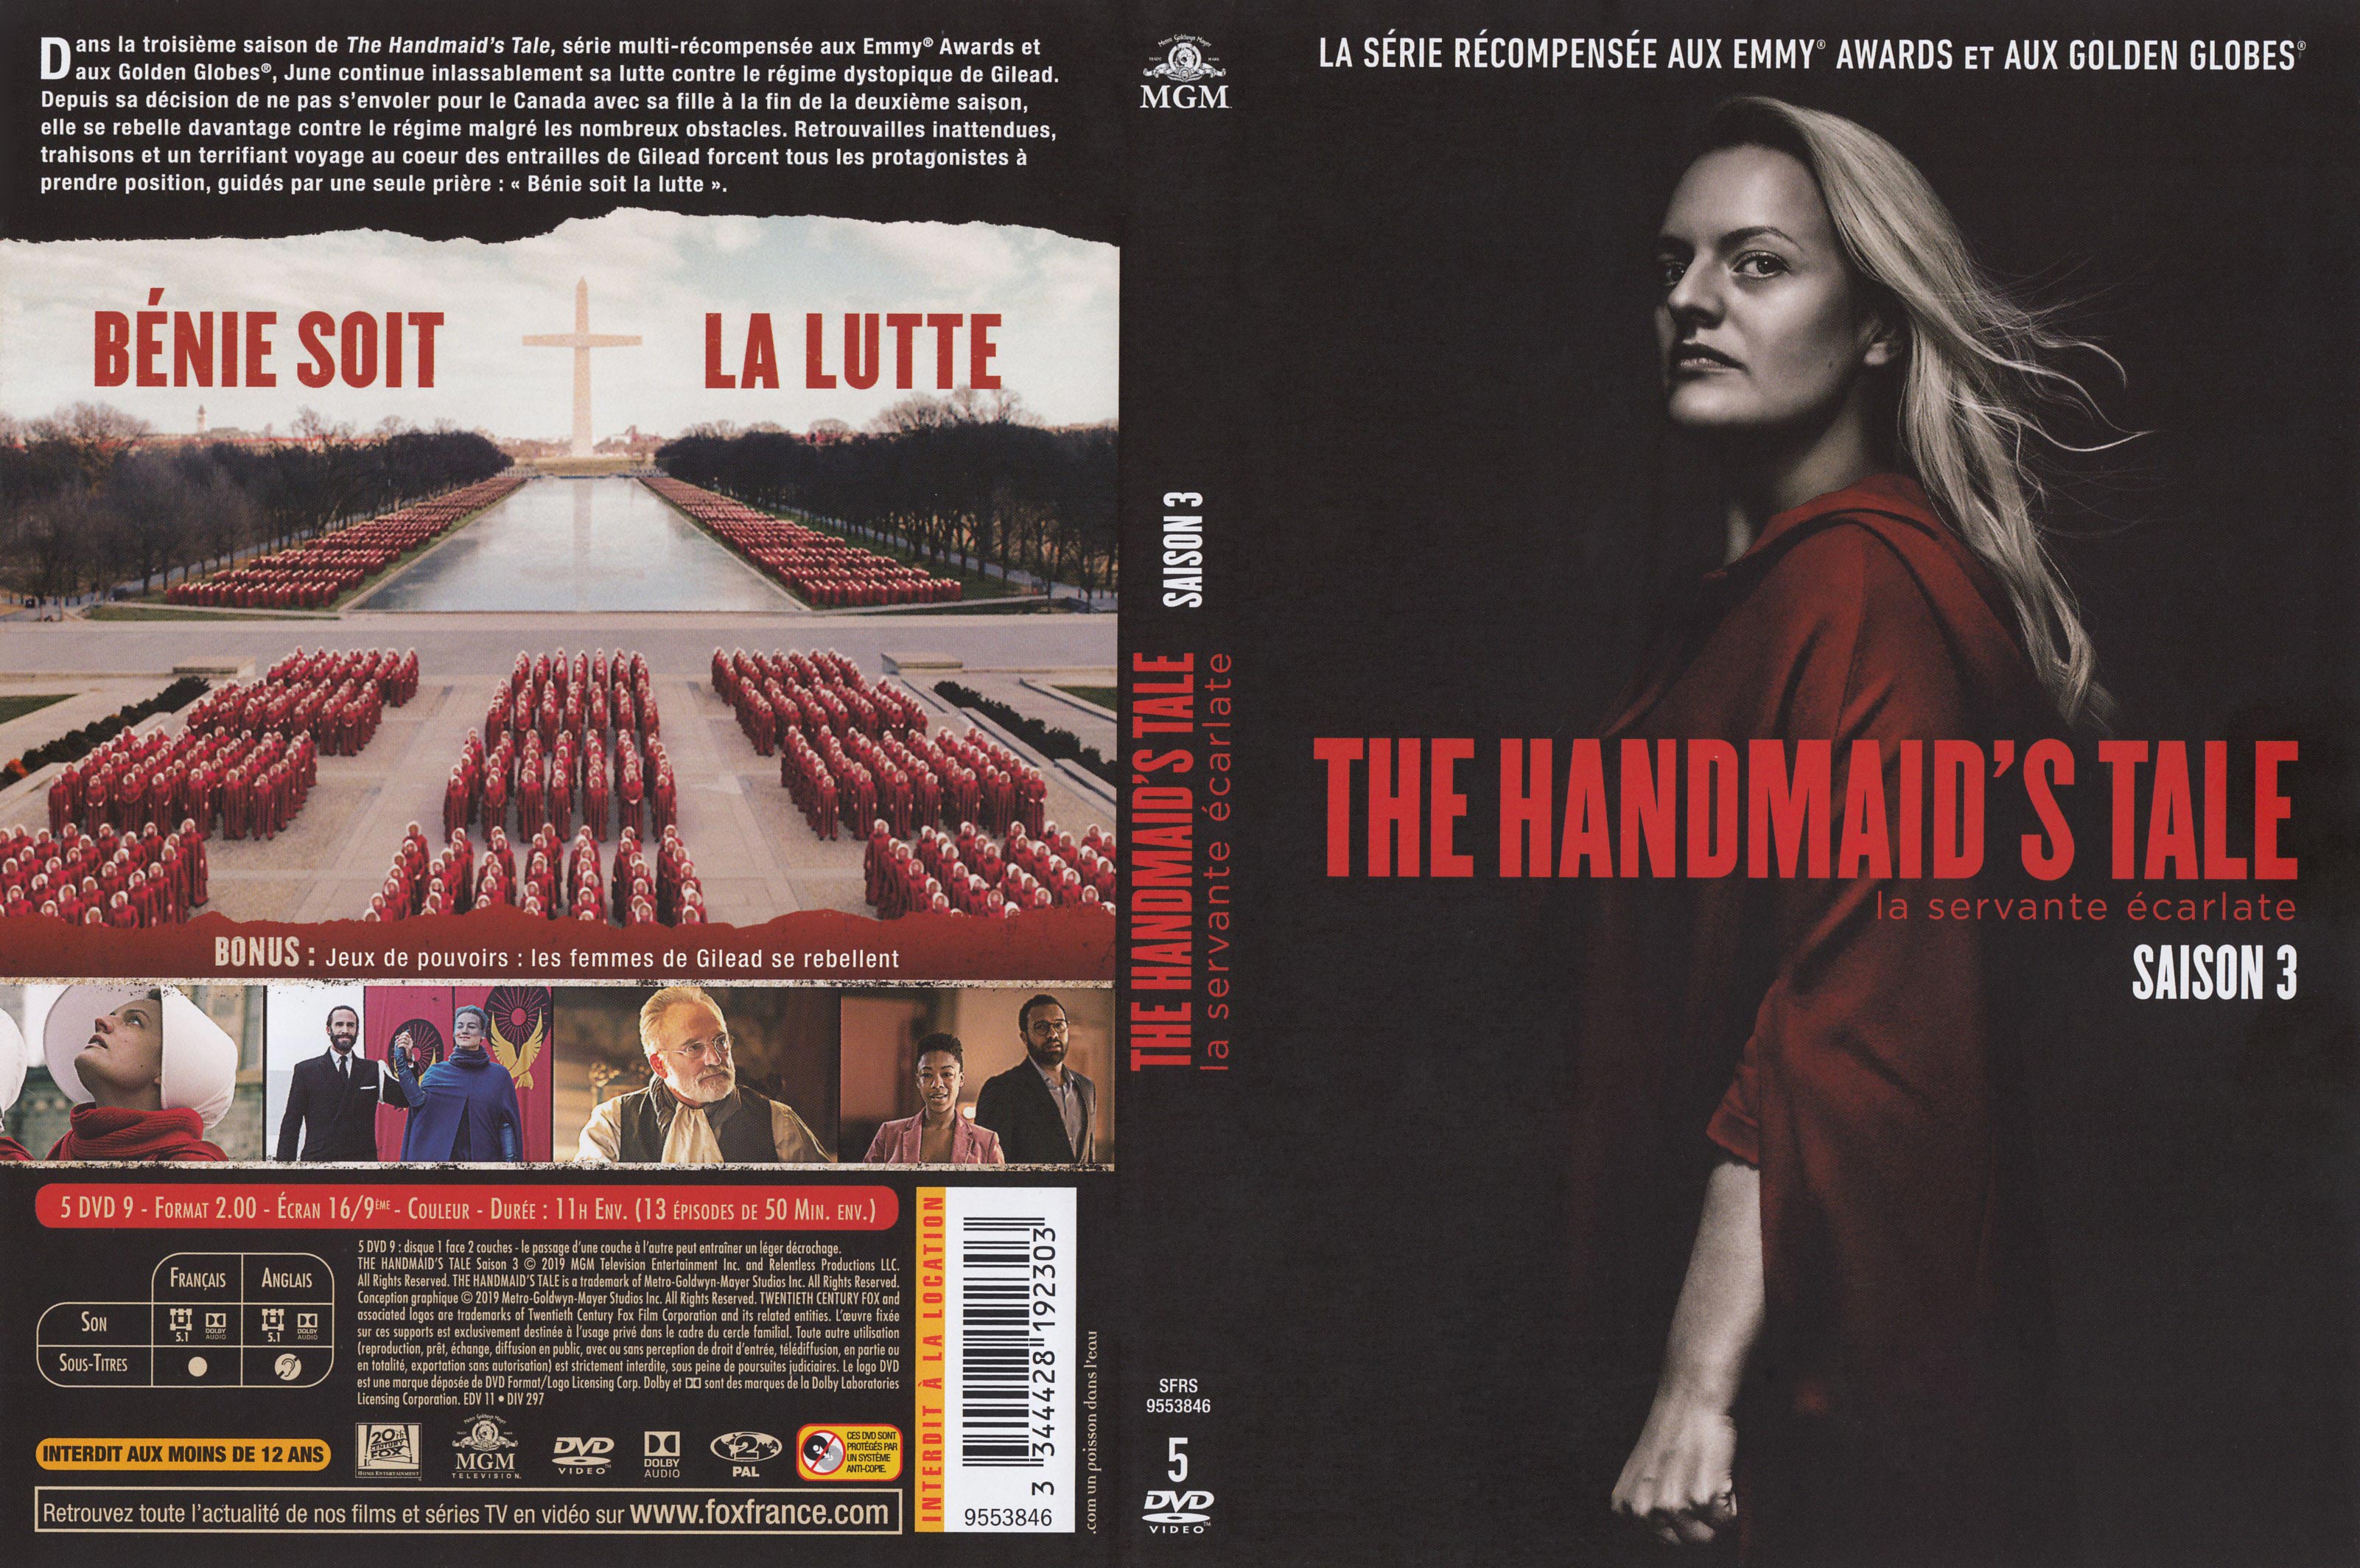 Jaquette DVD The handmaid